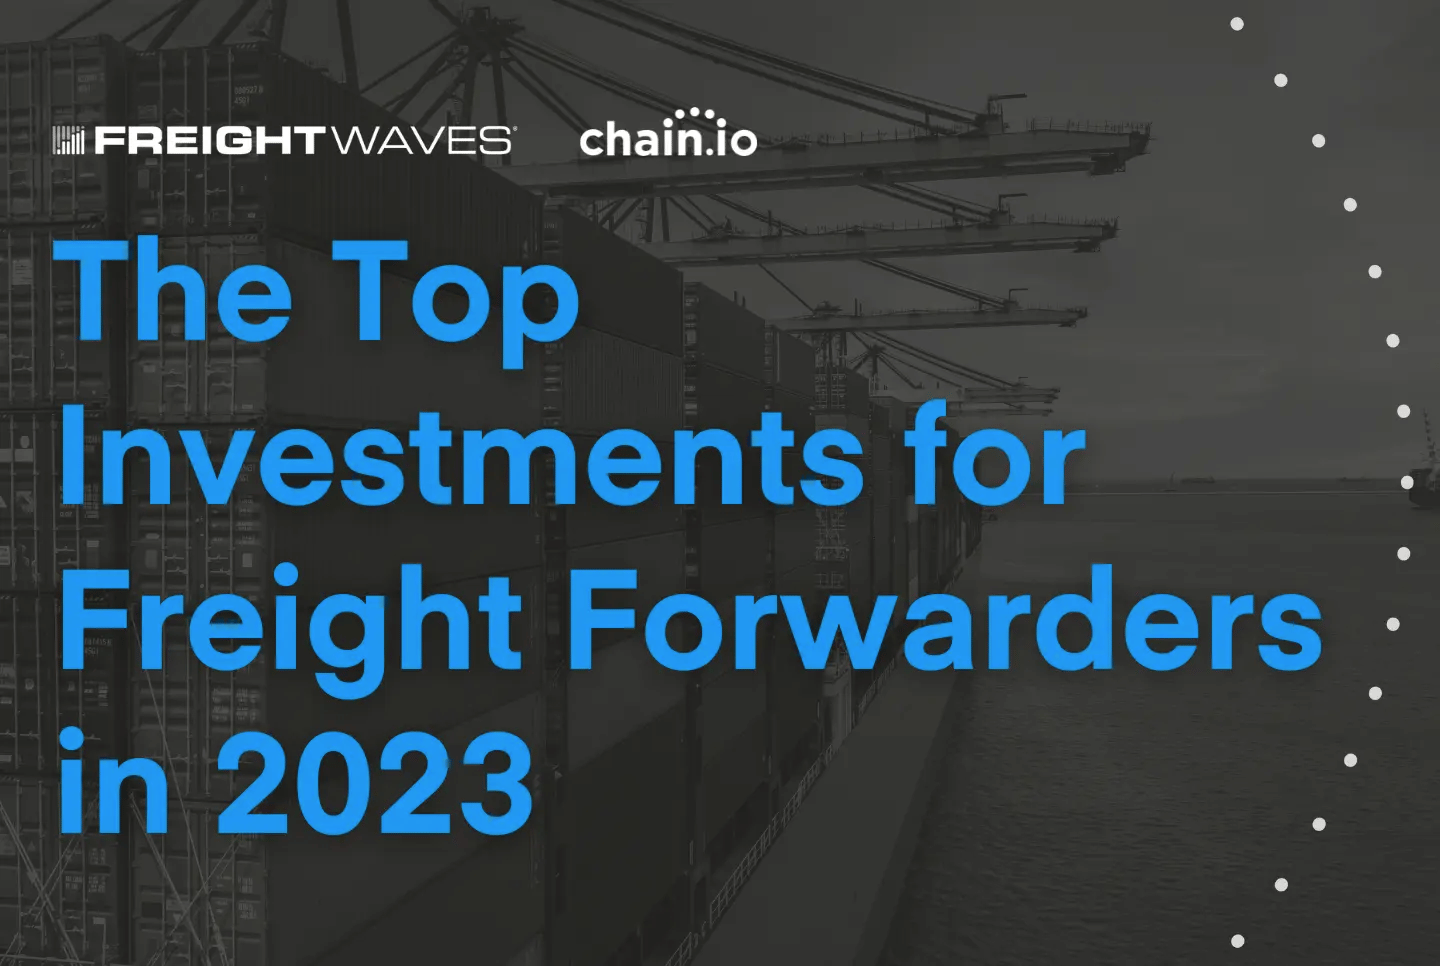 According to our research with FreightWaves, freight forwarders plan to invest the most in supply chain automation next year